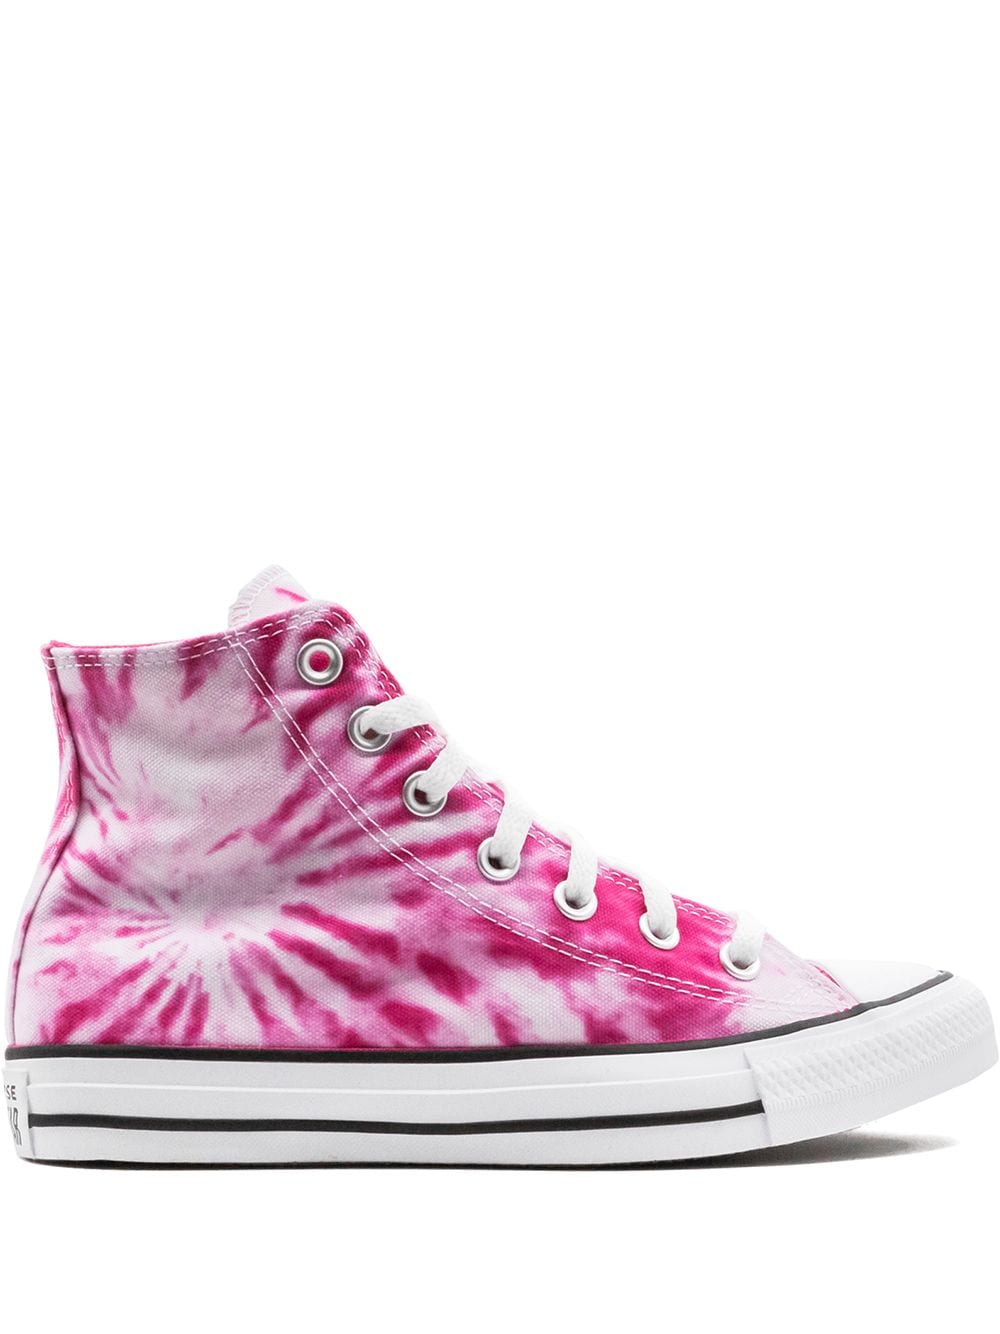 Converse Twisted Vacation Chuck Taylor Sneakers In Pink